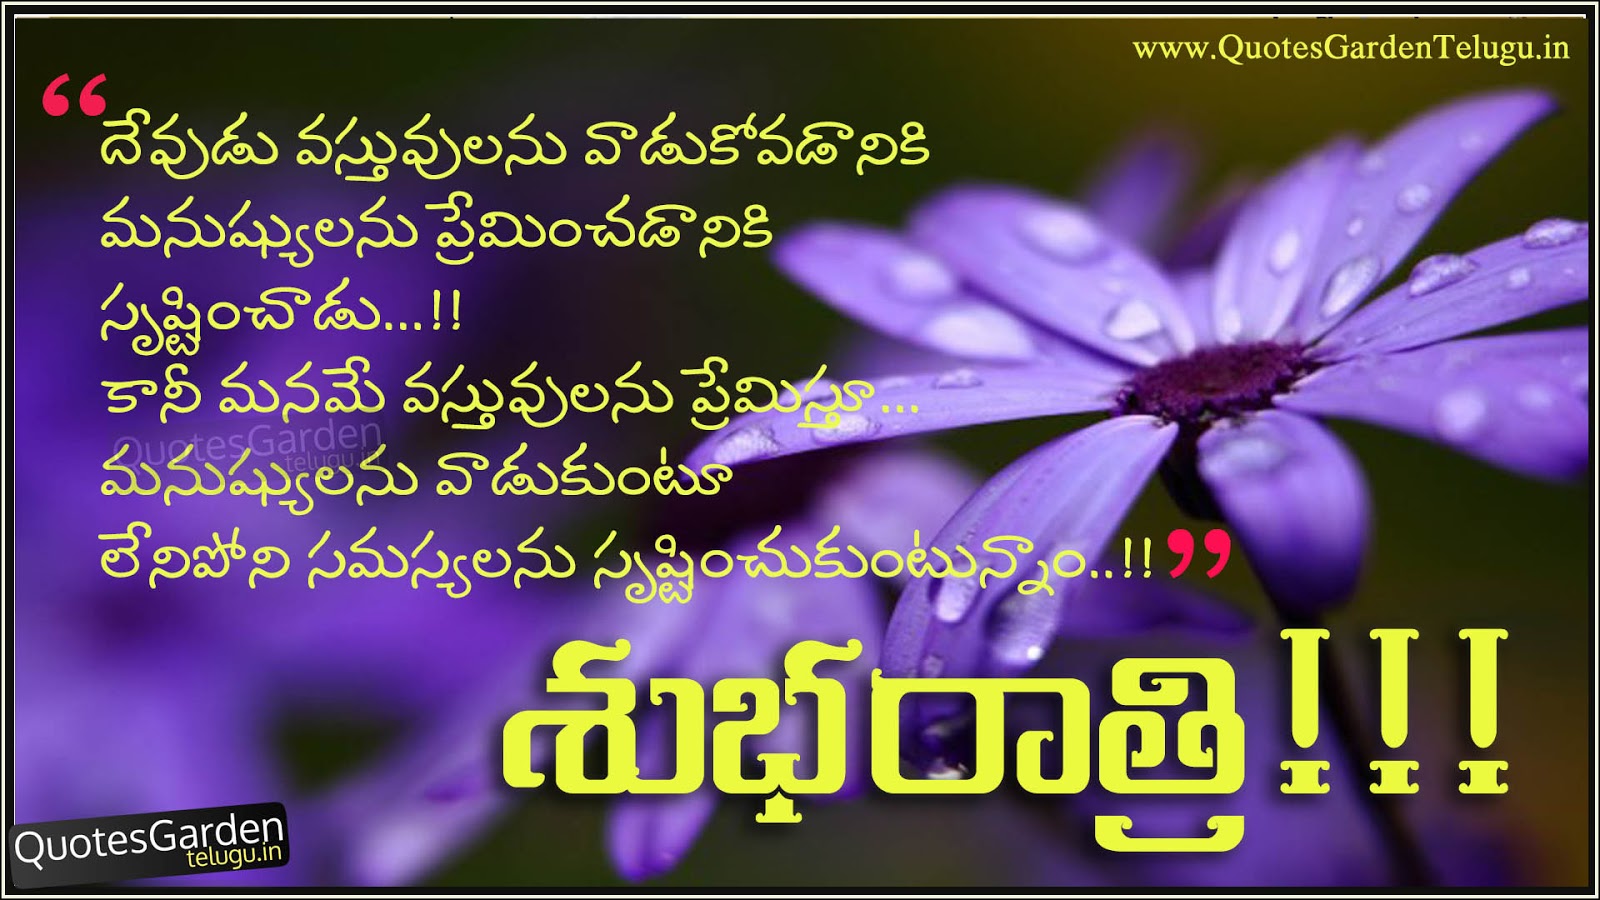 Telugu Good Night Quotes with lessons learned in life 1722 ...